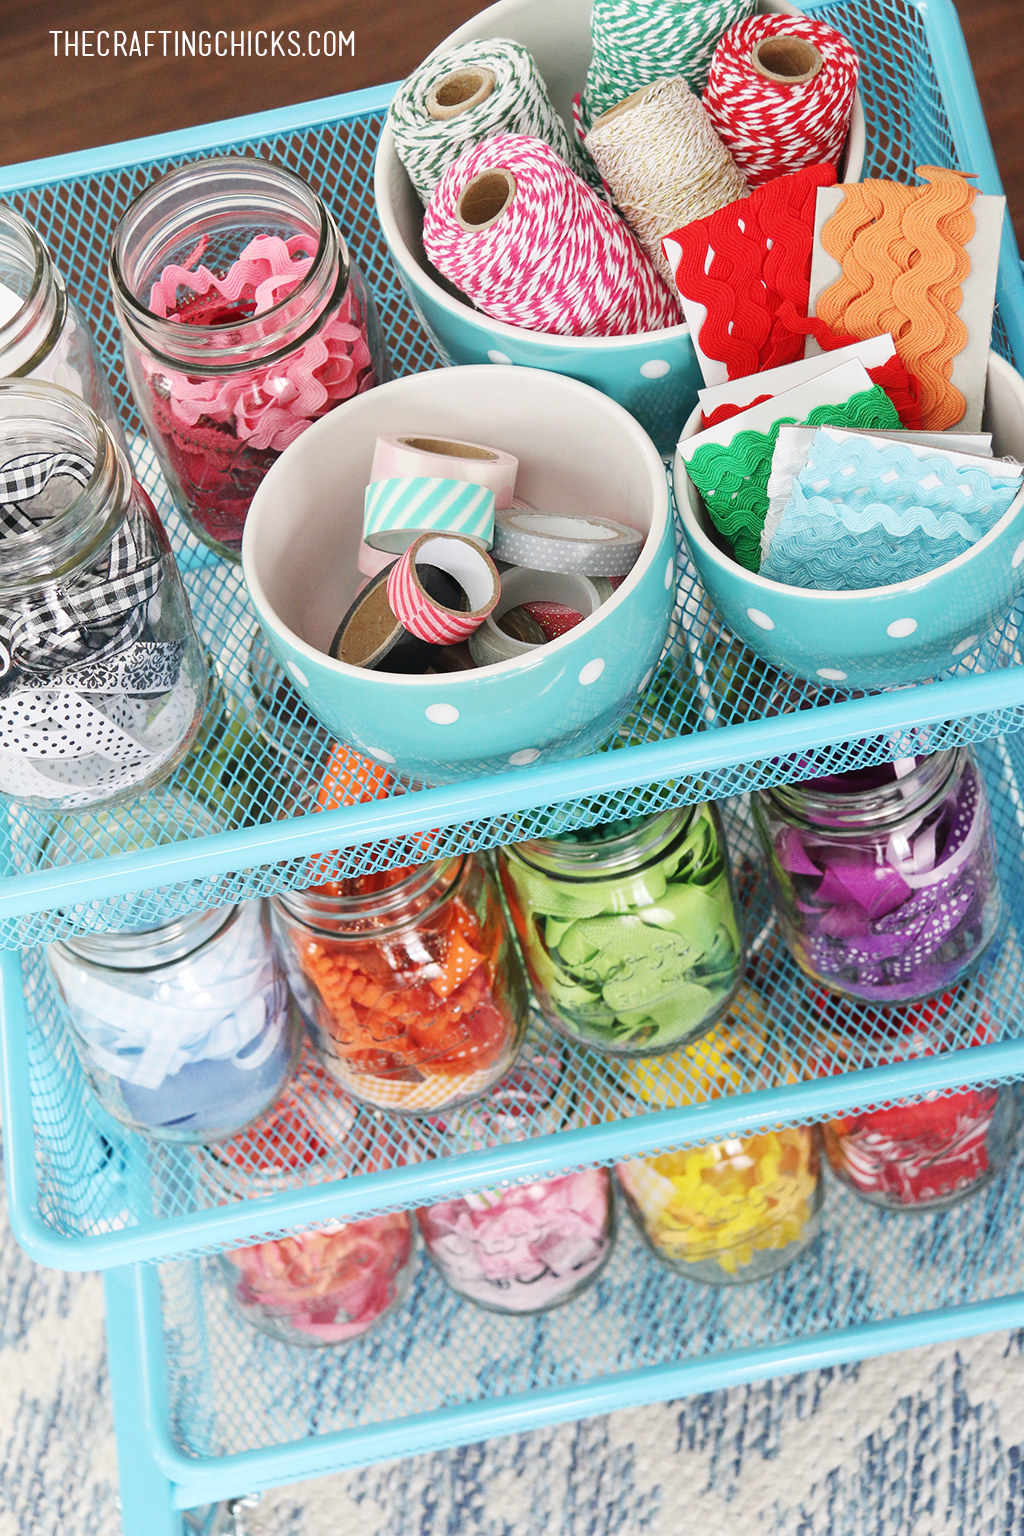 24 Ridiculously Clever Ways To Organize Your Crafting Supplies